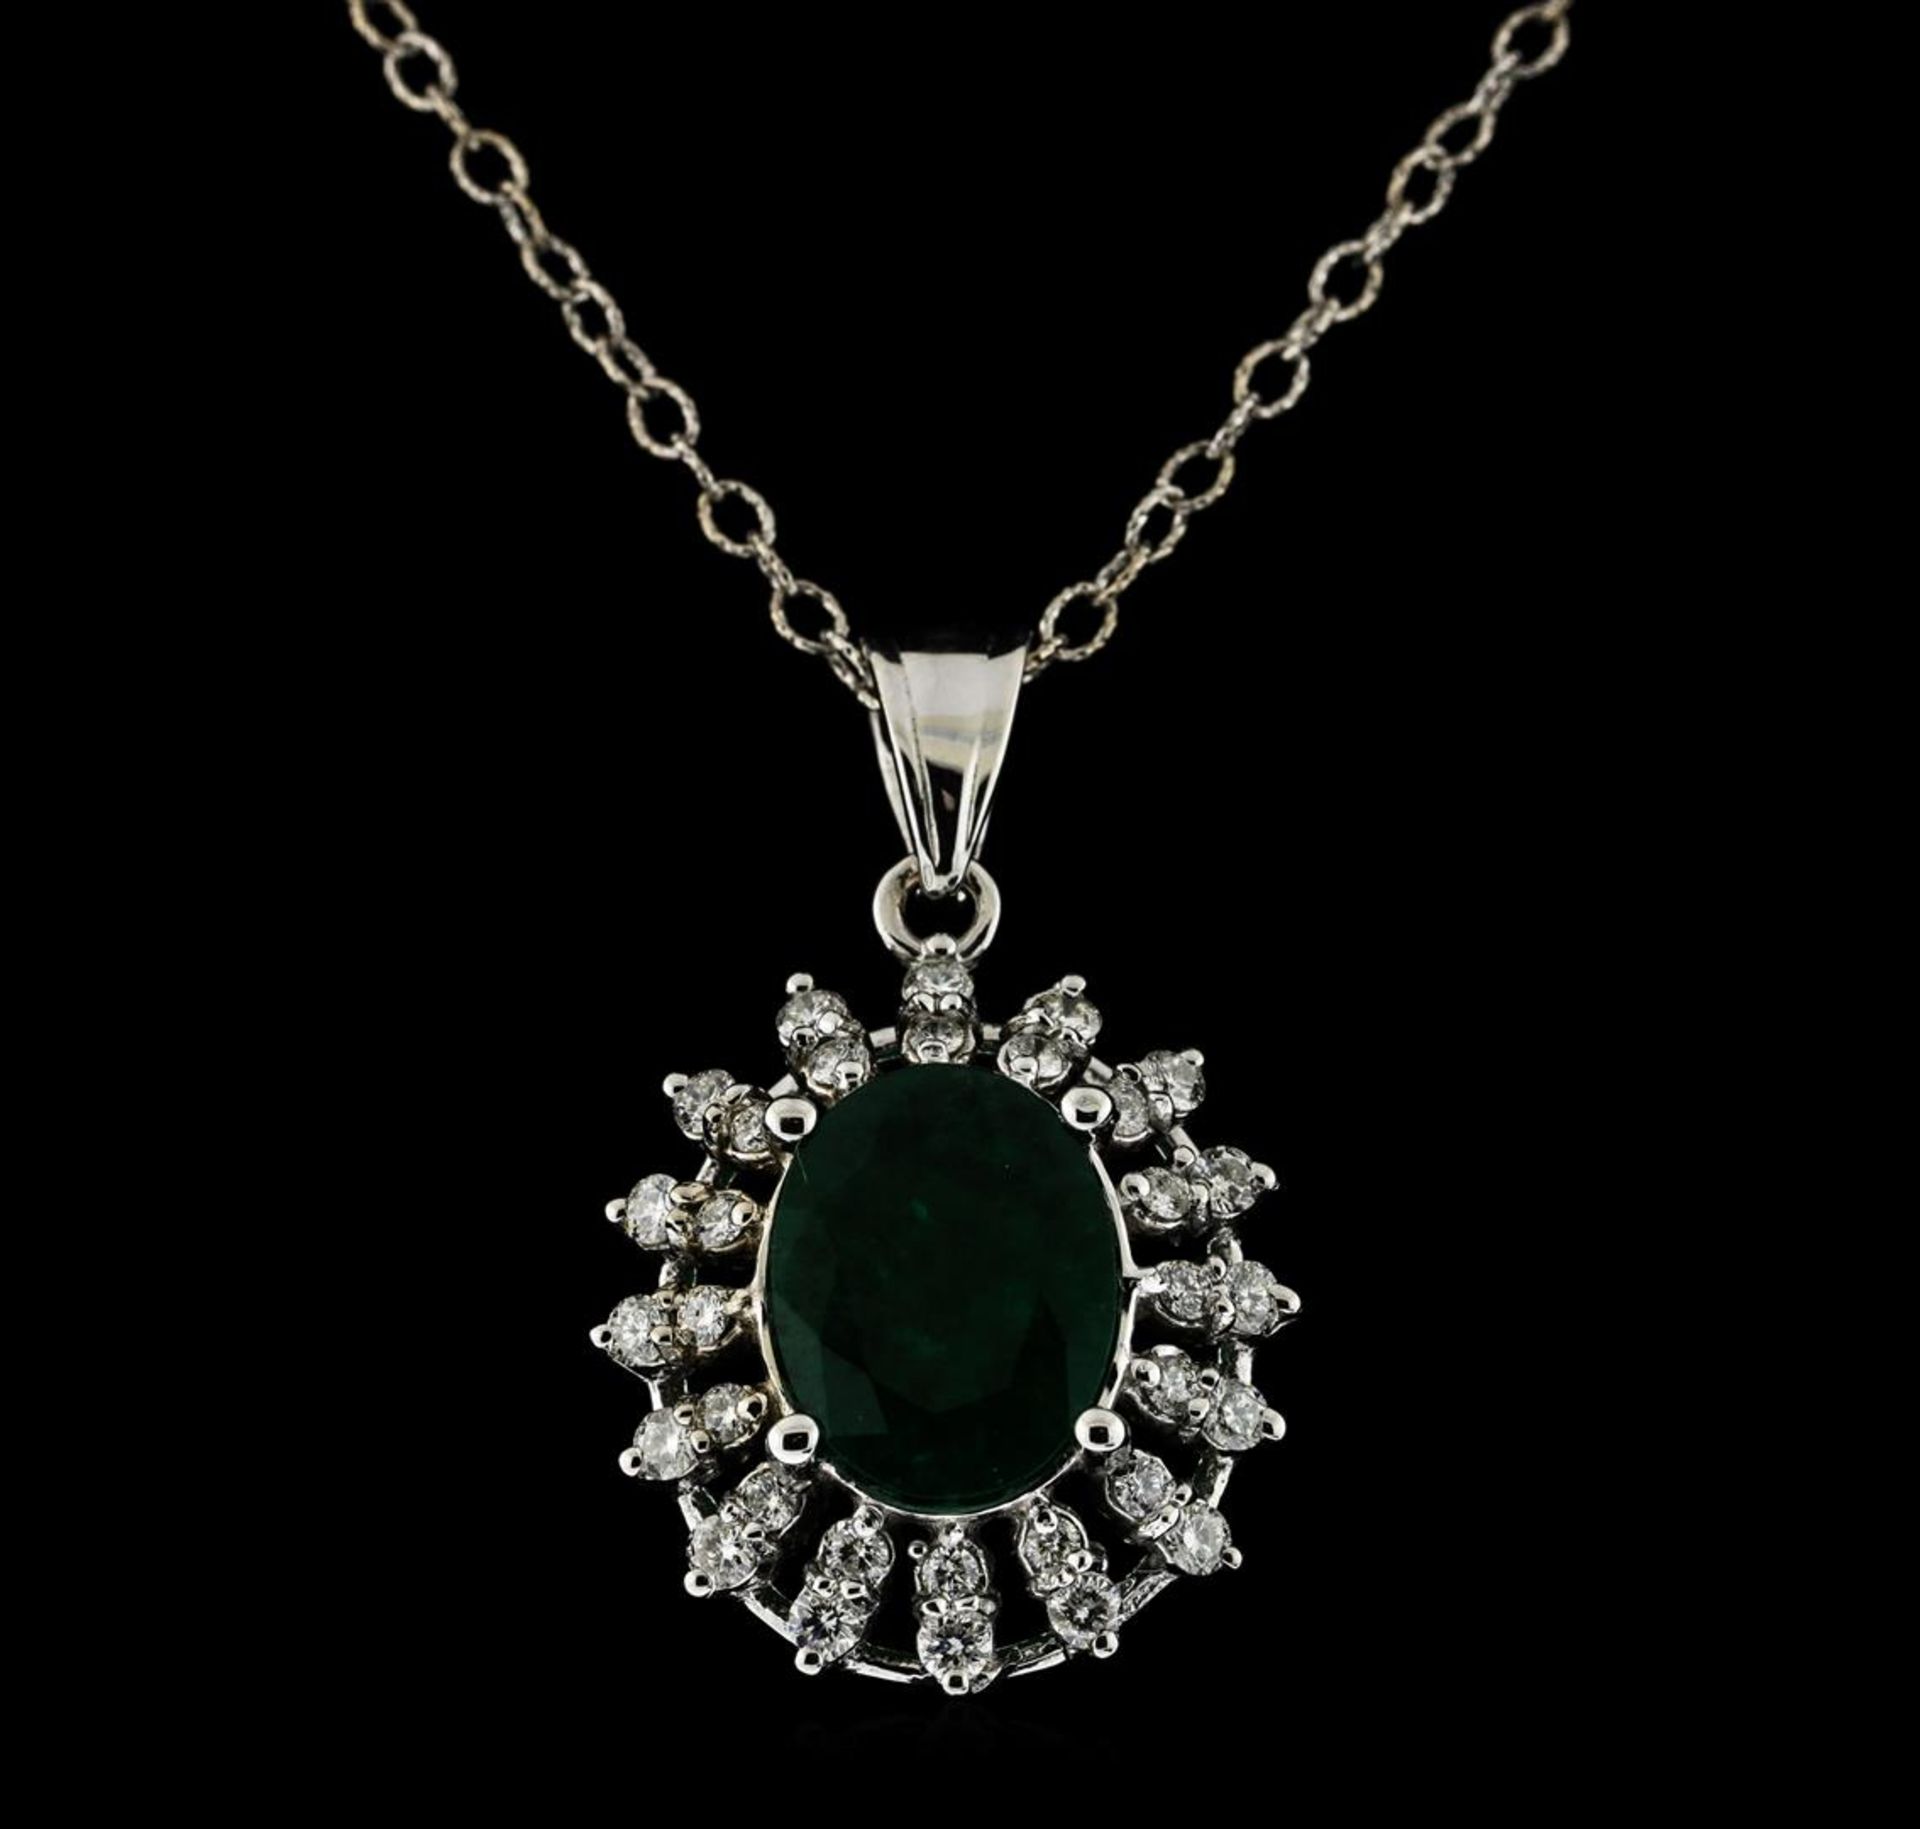 2.91 ctw Emerald and Diamond Pendant With Chain - 14KT White Gold - Image 2 of 3